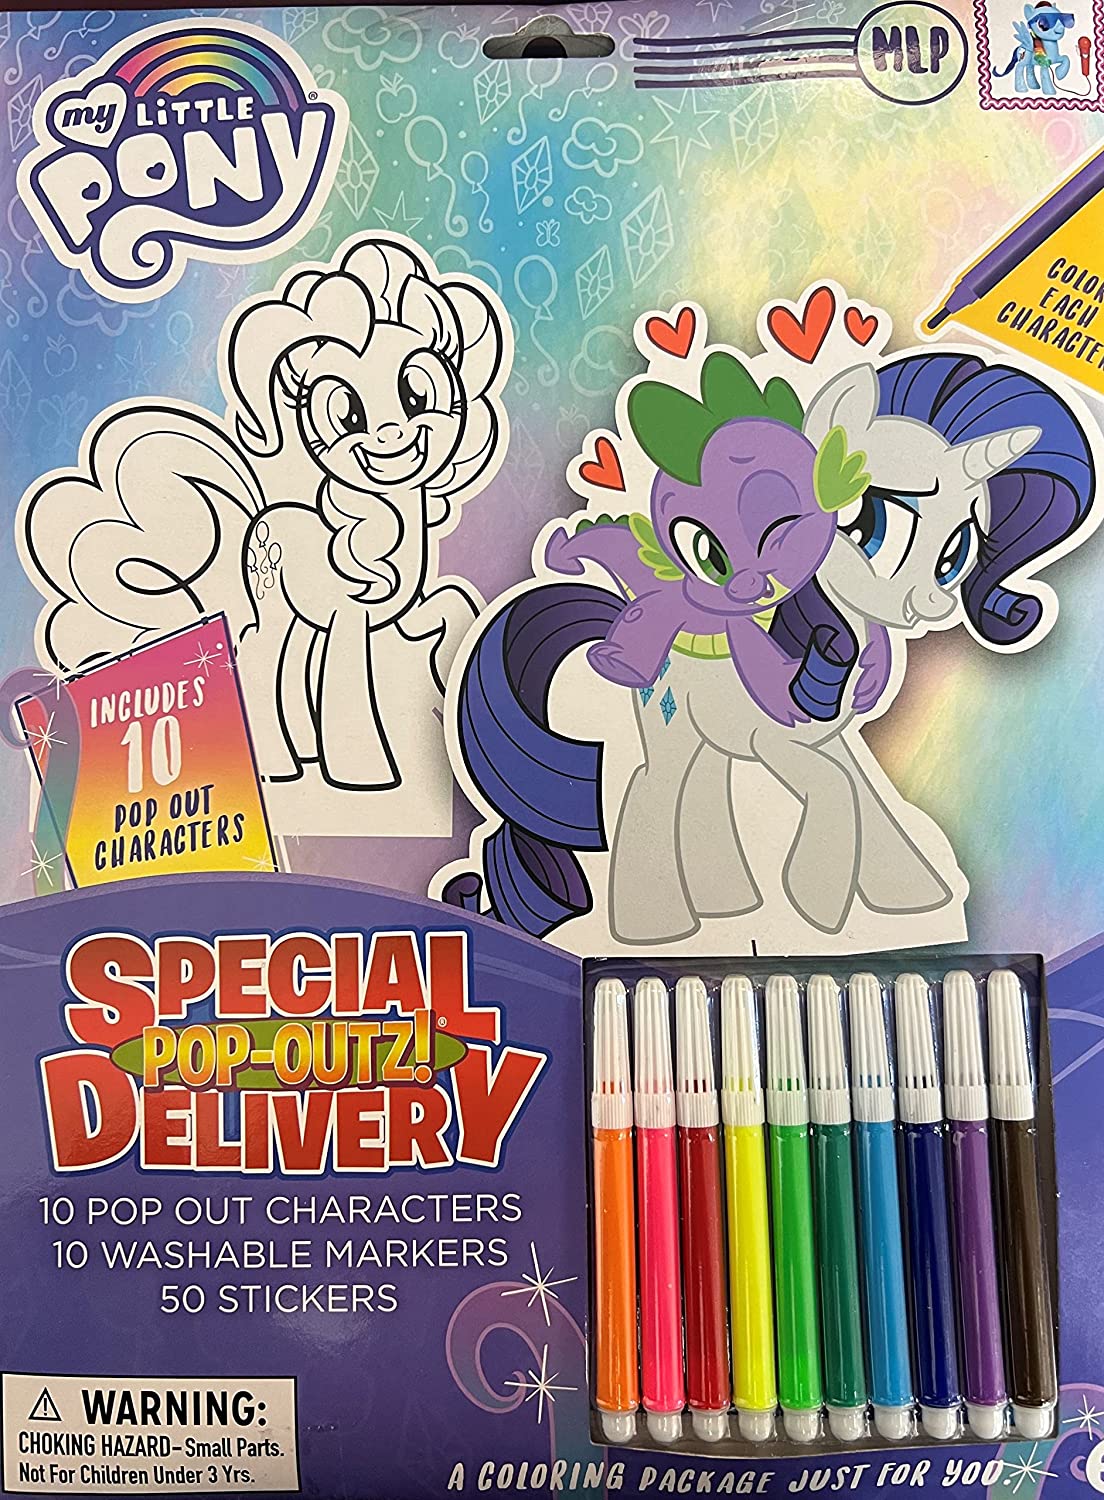 MLP Coloring Kit Pop-Outz and Activity Play Set 1